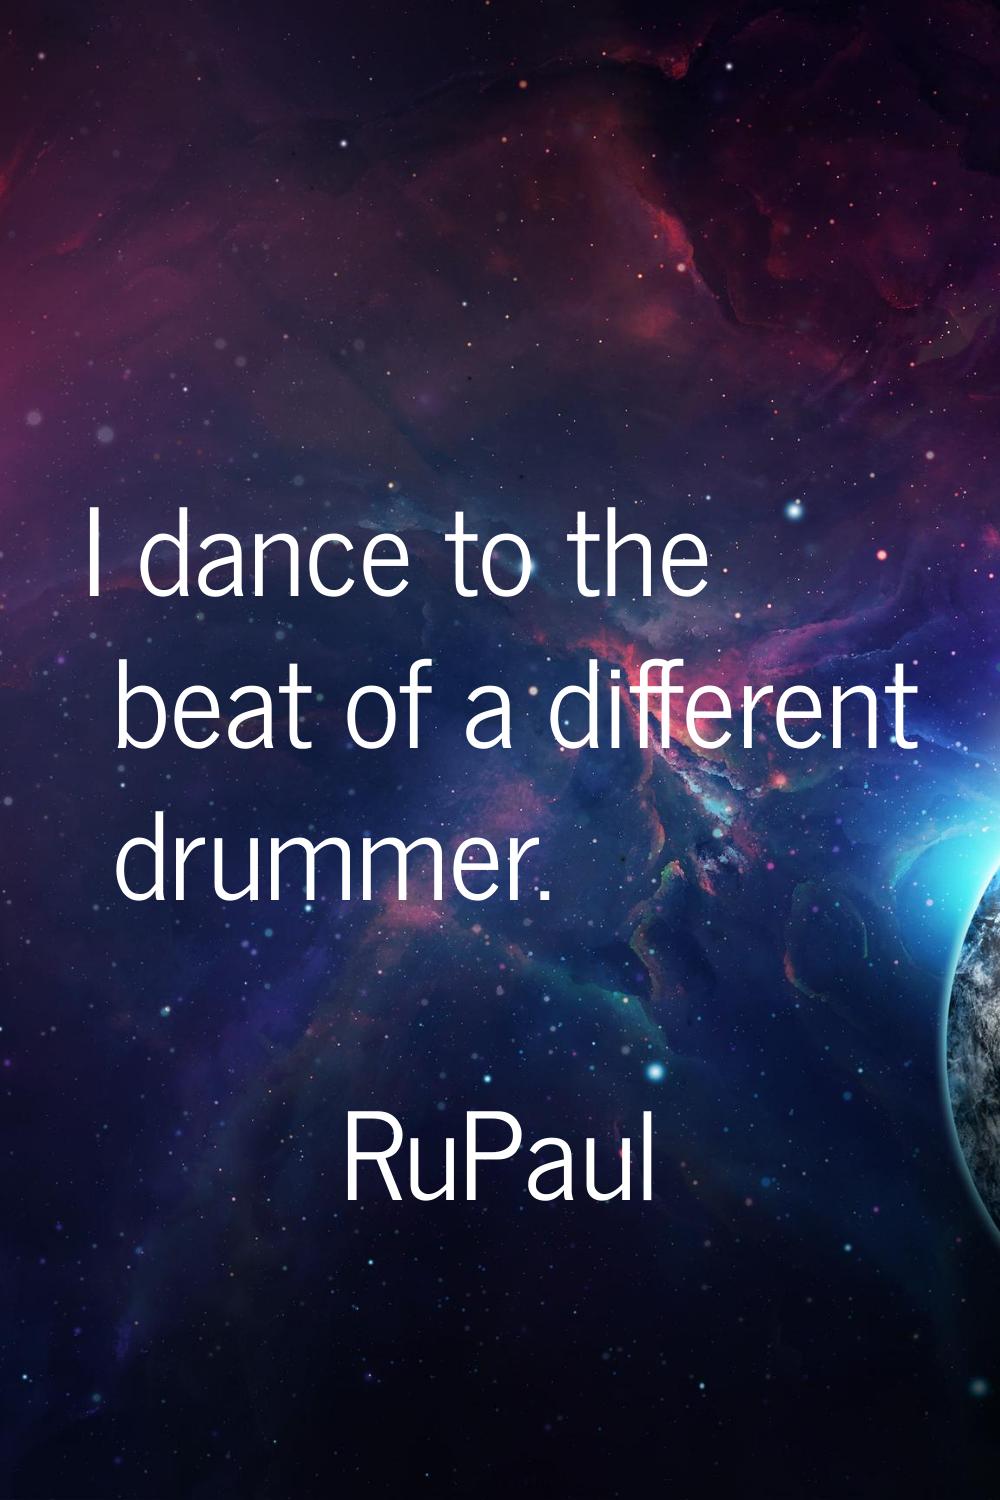 I dance to the beat of a different drummer.